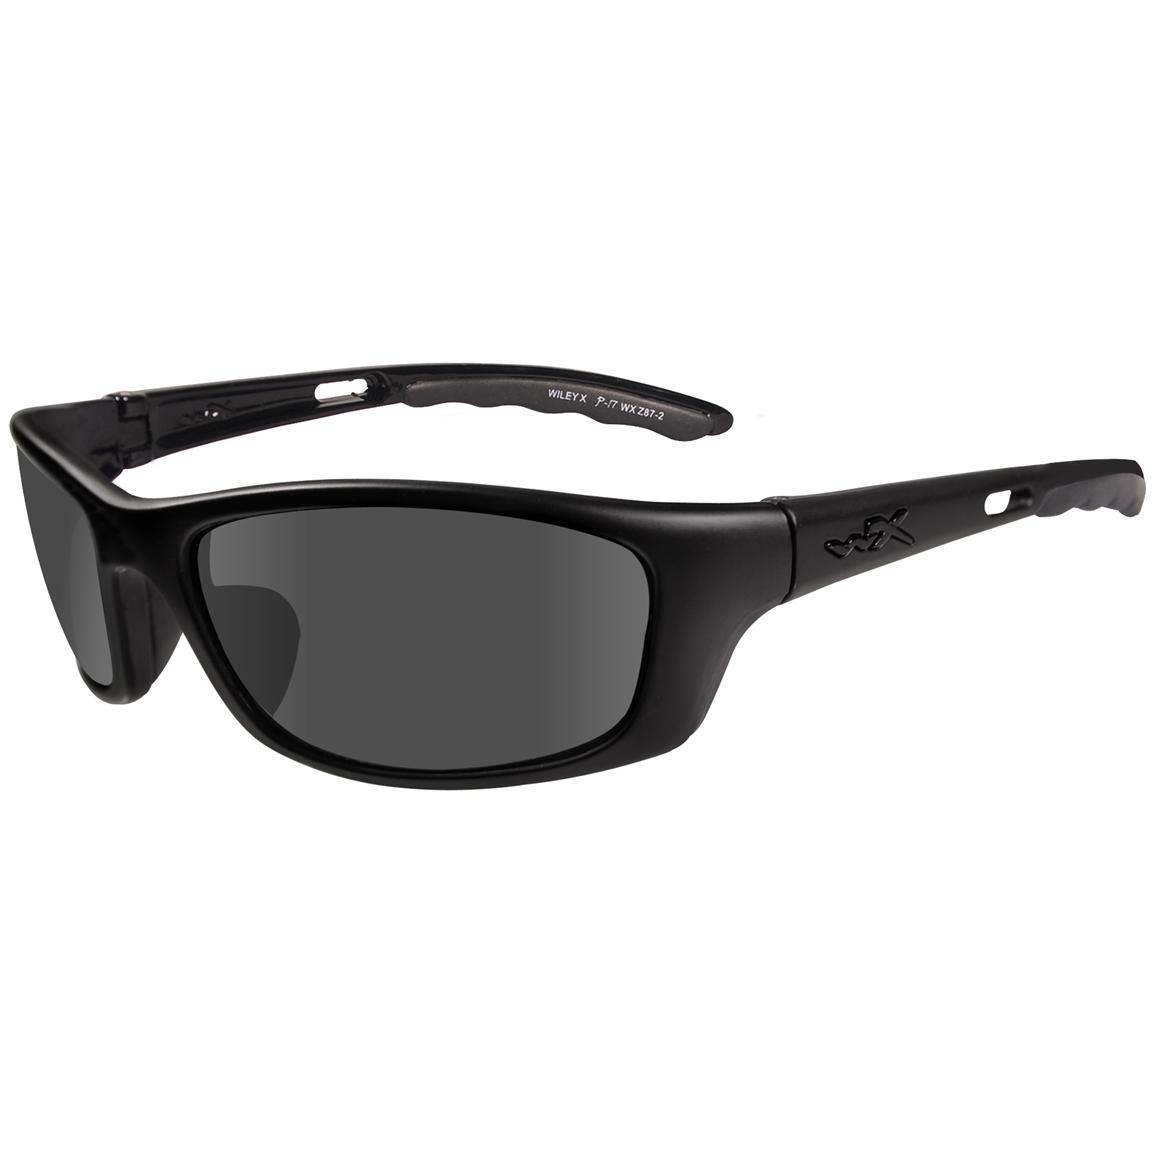 Wiley X® P-17 Active Series Black Ops Sunglasses